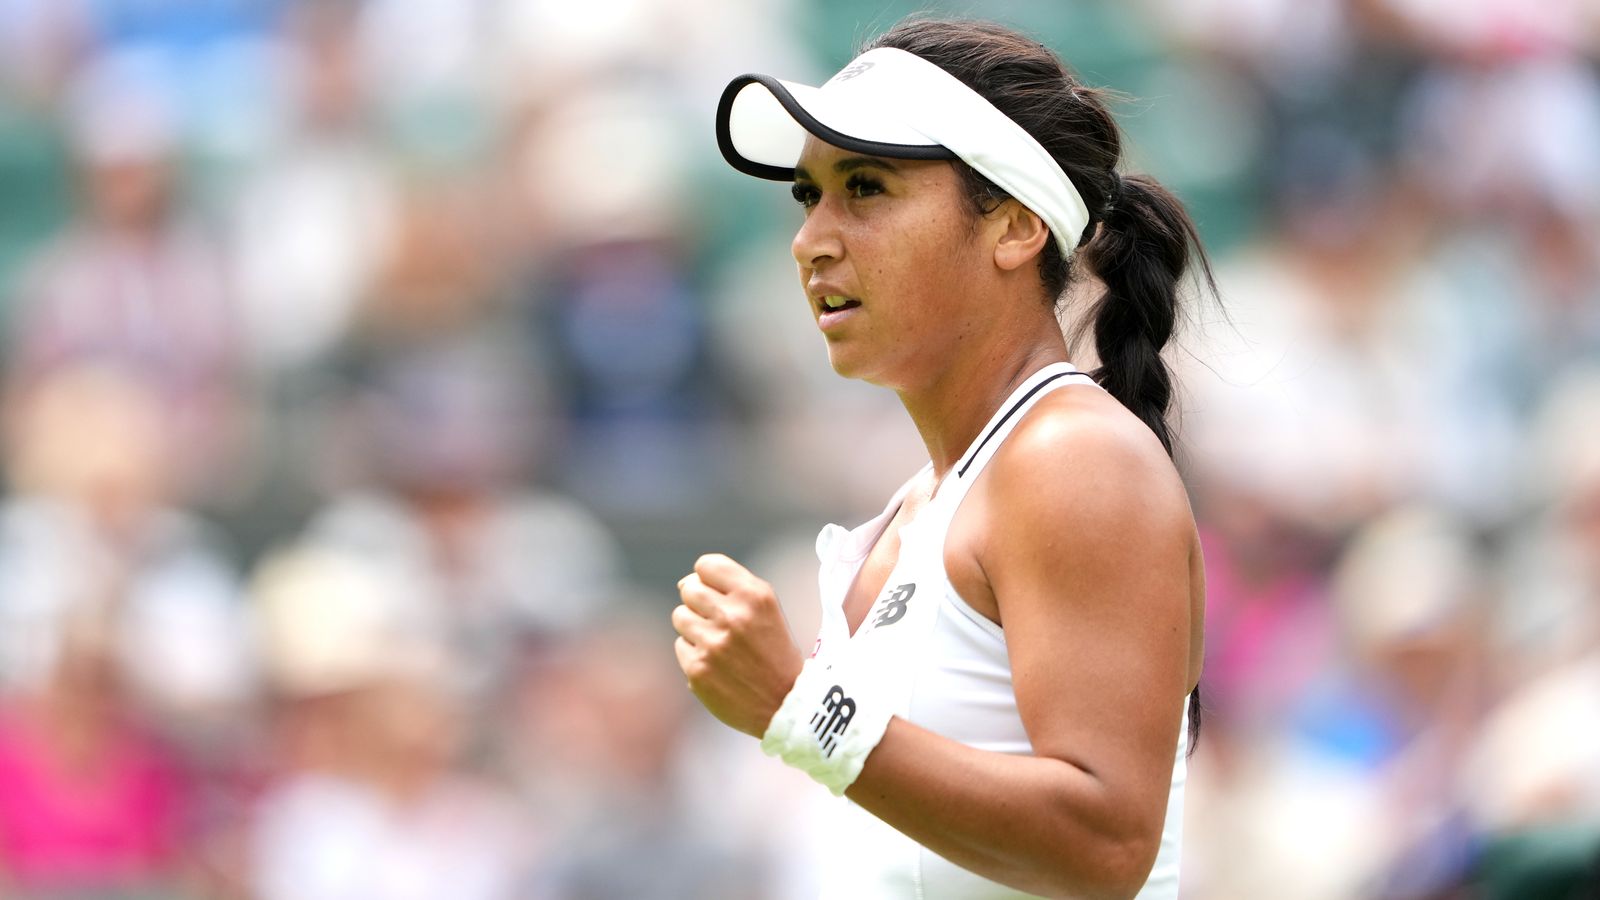 Wimbledon: Heather Watson charges into fourth round for first time in career | Tennis News